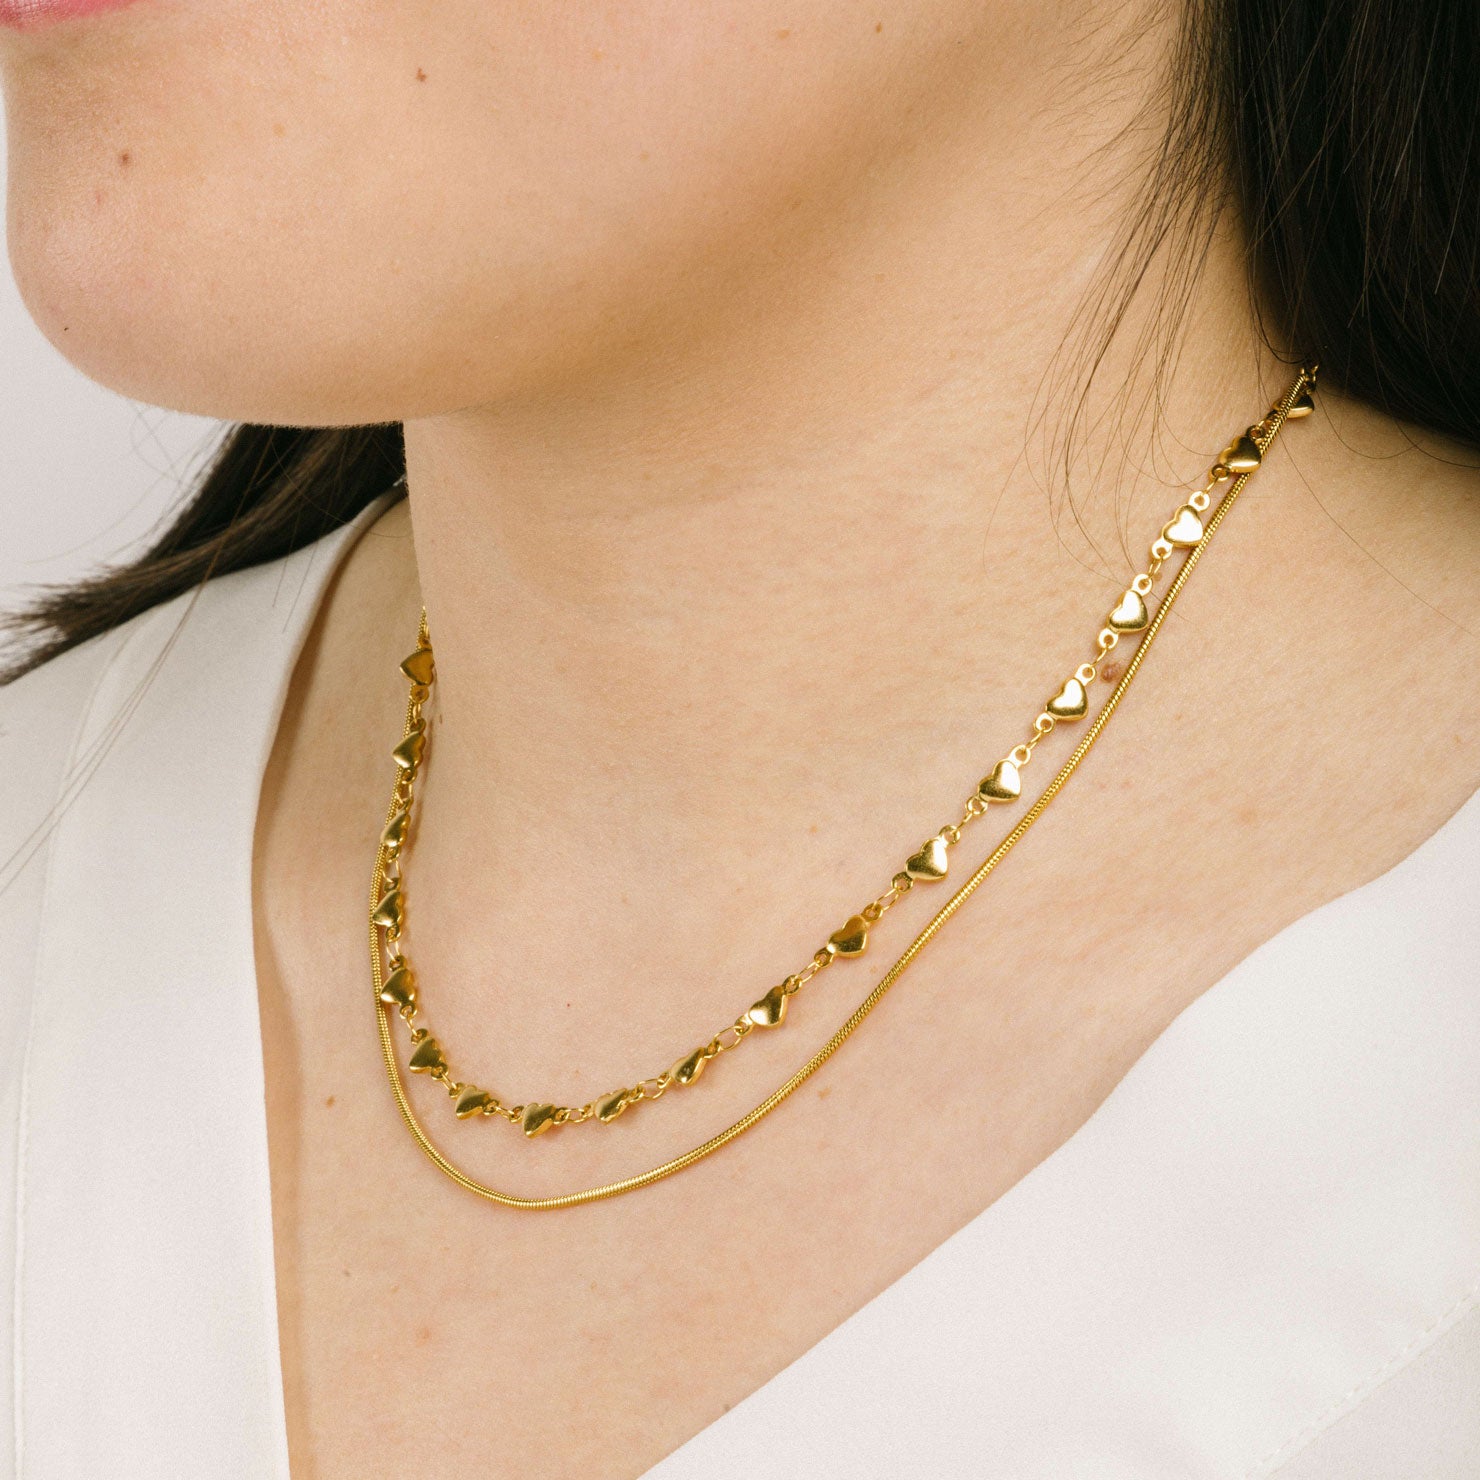 A model wearing the Heart Chain Double Layered Necklace is crafted from 14K Gold Plated Stainless Steel, which is water resistant and non-tarnishing. The necklace can be adjusted for a perfect fit. Please Note: This product is one necklace.